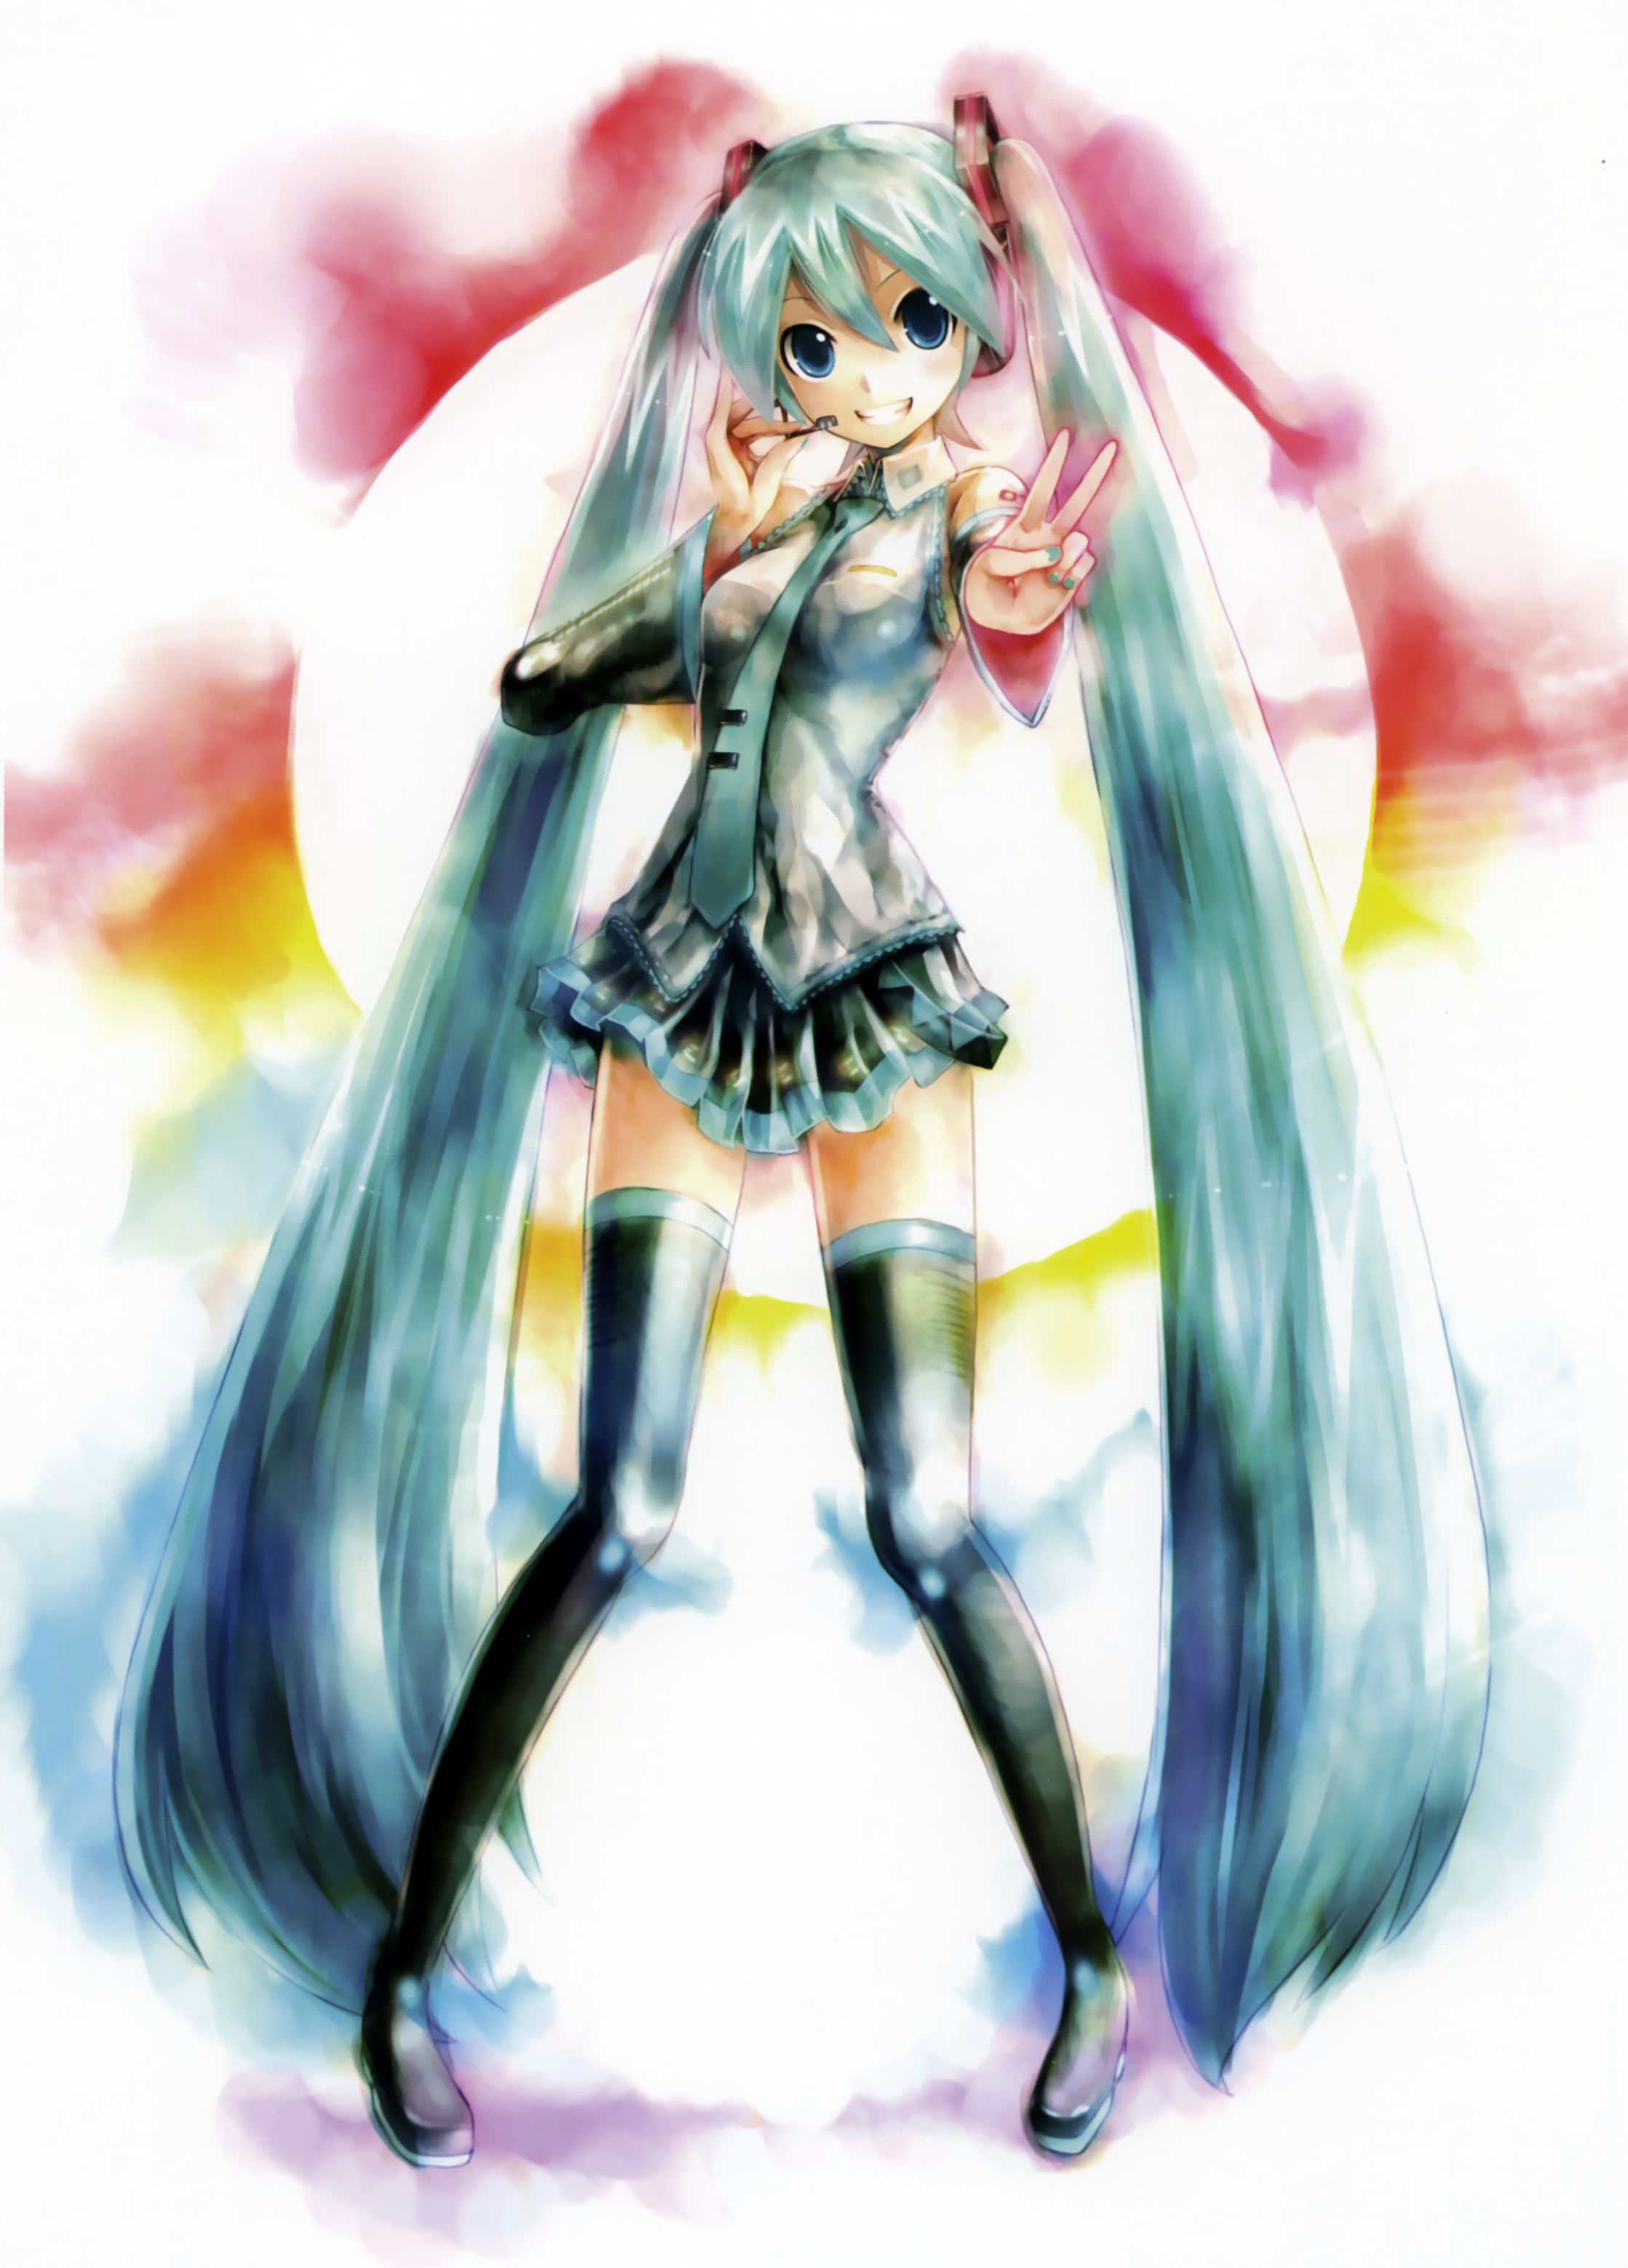 Assorted Miku images after a long absence. 12